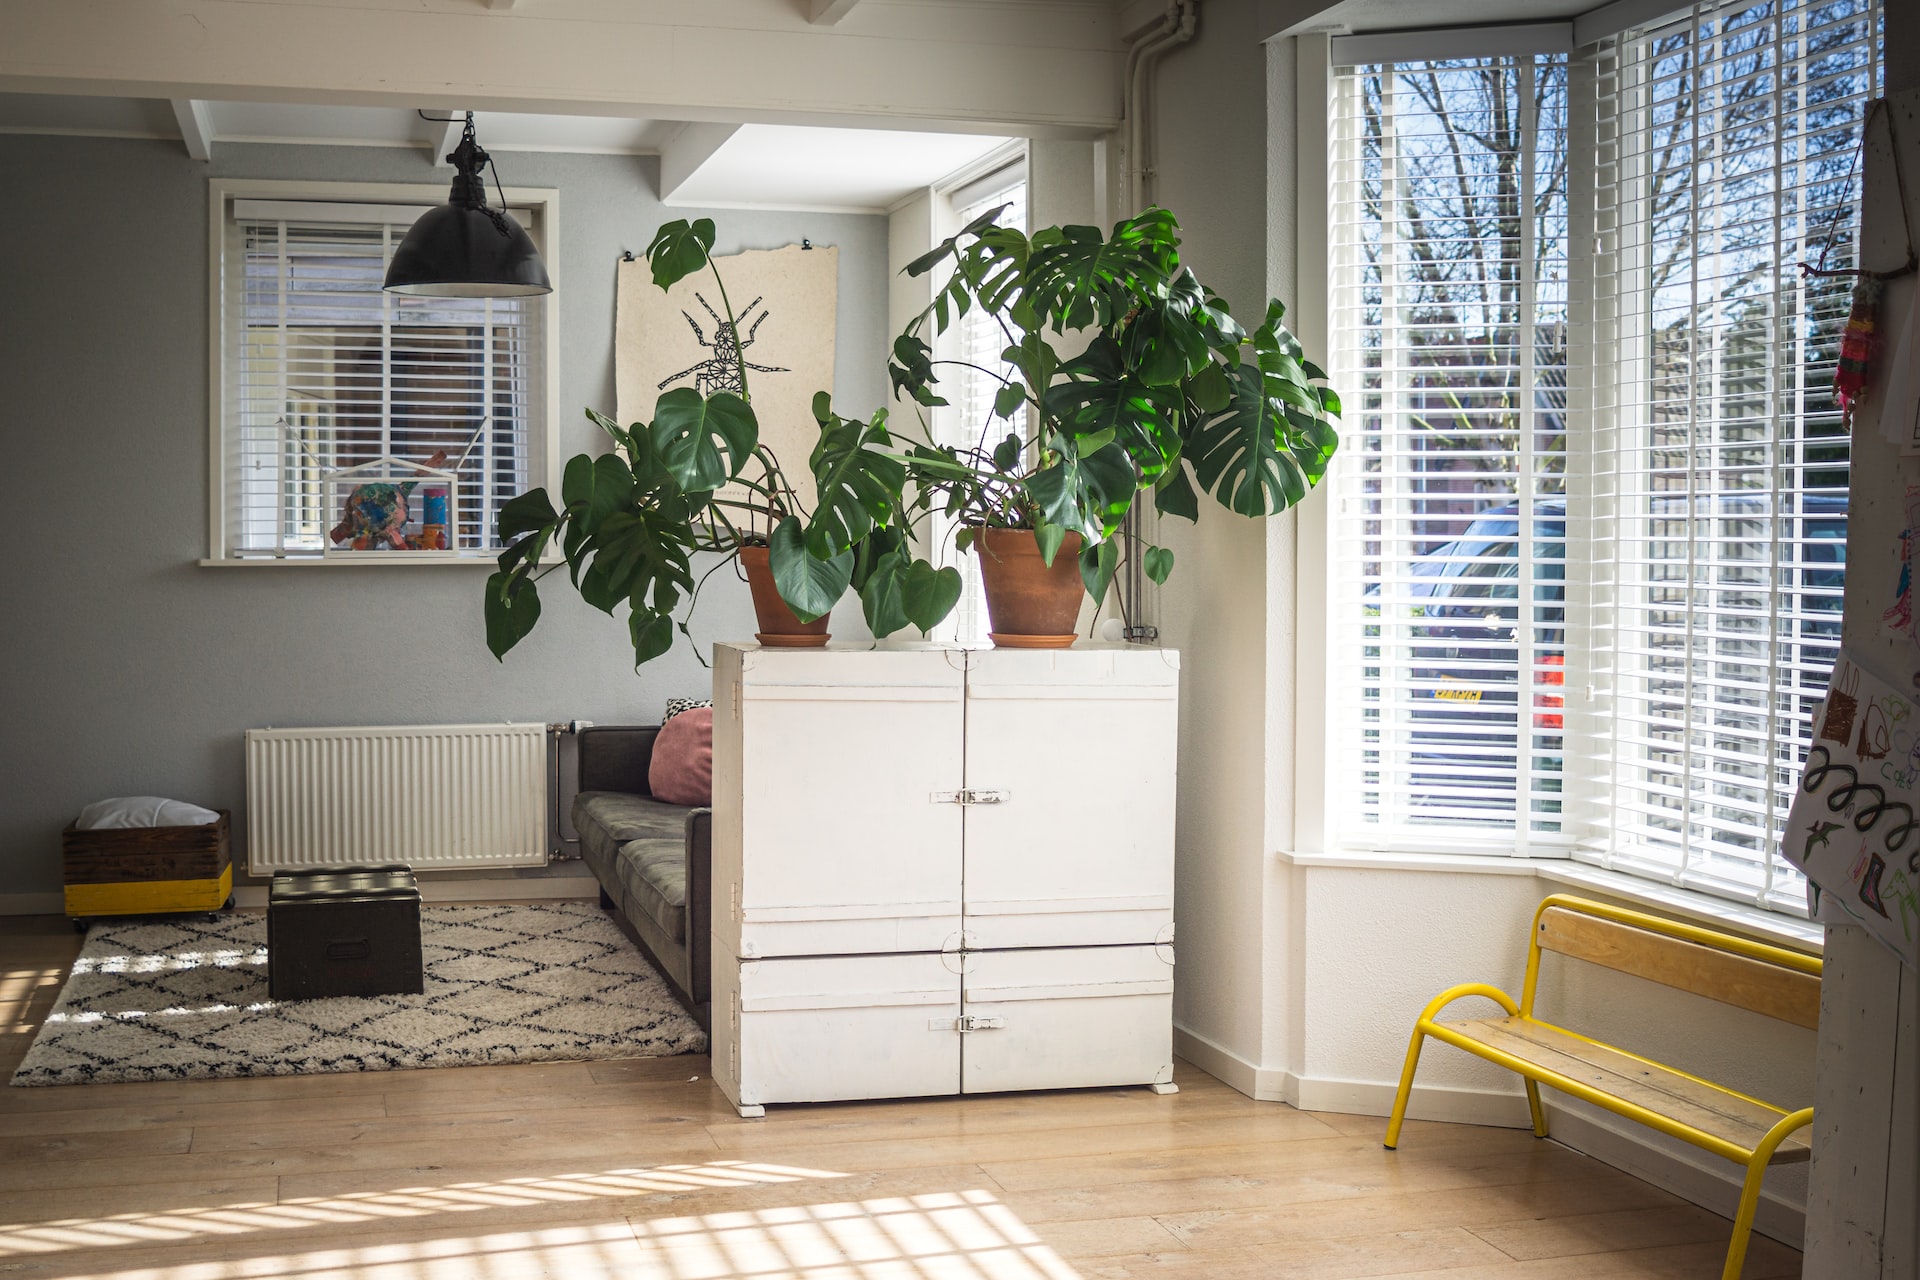 How to improve indoor air quality